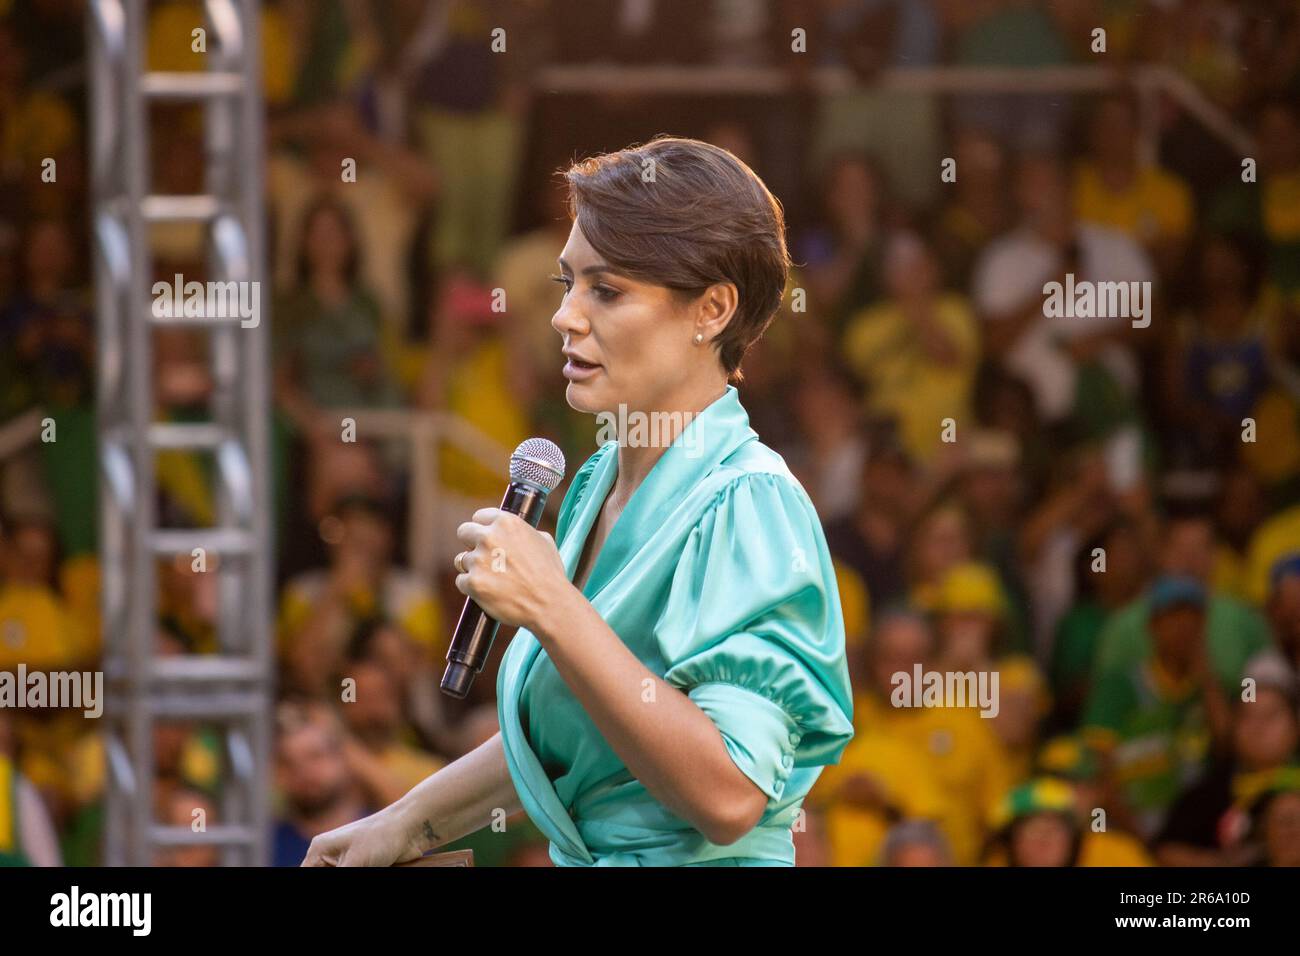 The Michelle Bolsonaro stands on stage during the official campaign launch for re-election Stock Photo